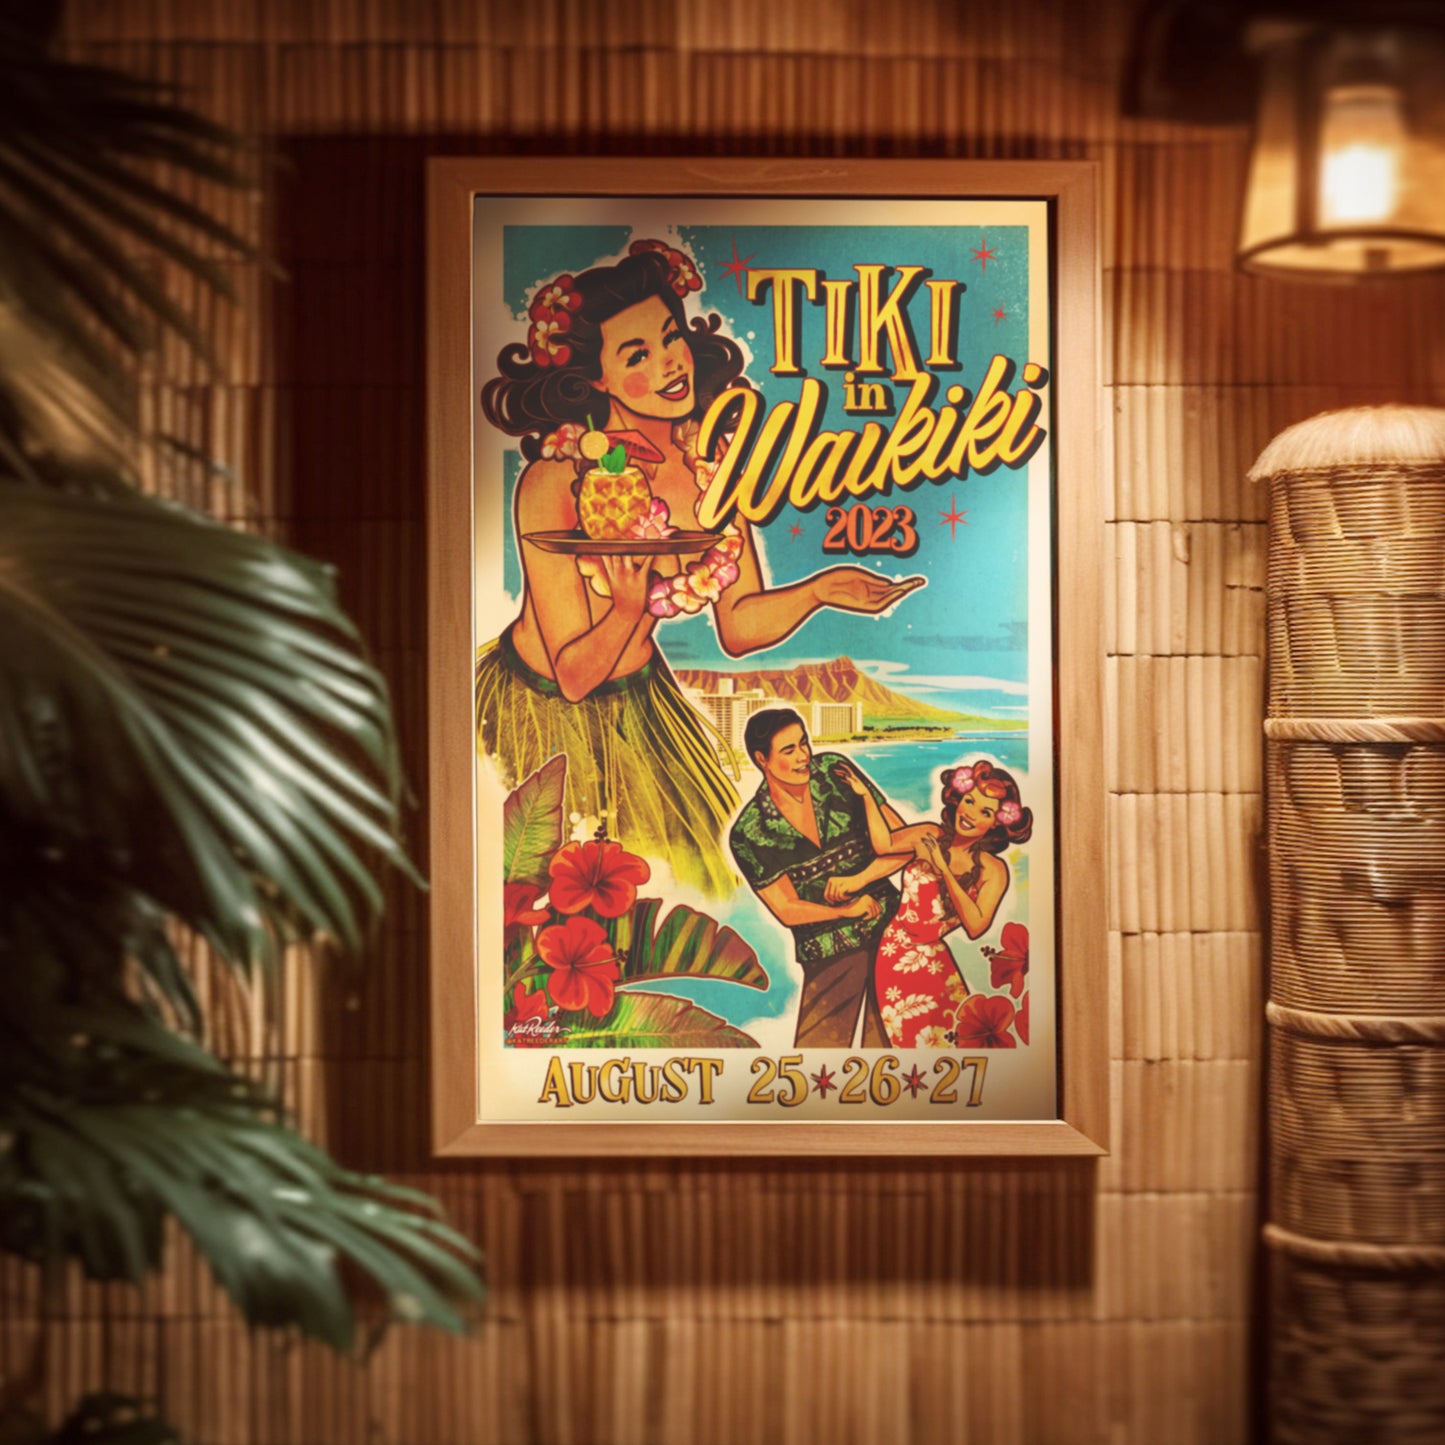 framed 11x17 poster of a tiki pin up girl serving drinks at the beach. Frame hangs in a wood and bamboo theme living room with moody lighting. 